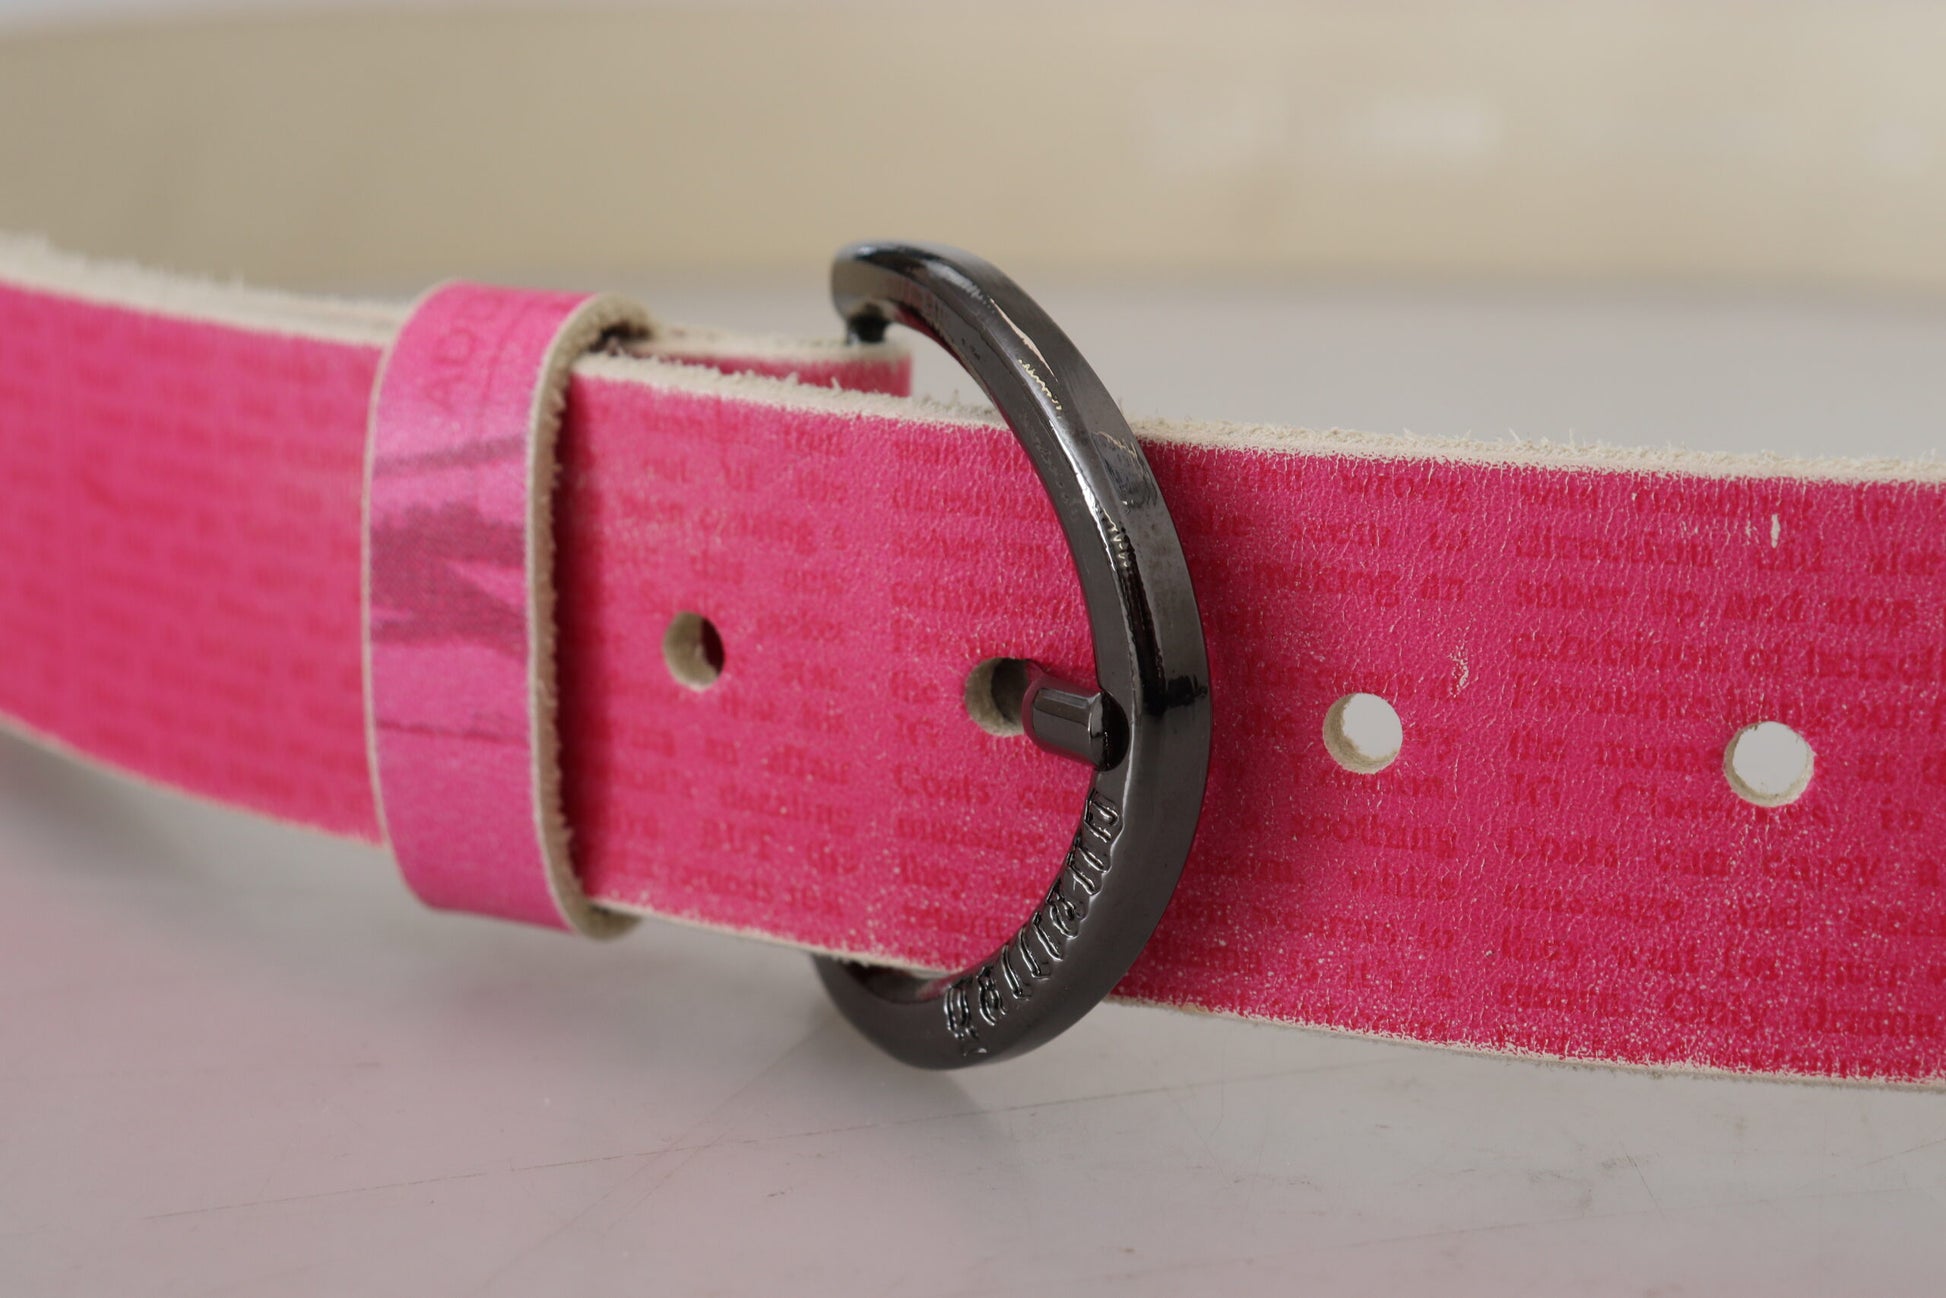 John Galliano Pink Leather Letter Logo Round Buckle Waist Belt - Designed by John Galliano Available to Buy at a Discounted Price on Moon Behind The Hill Online Designer Discount Store